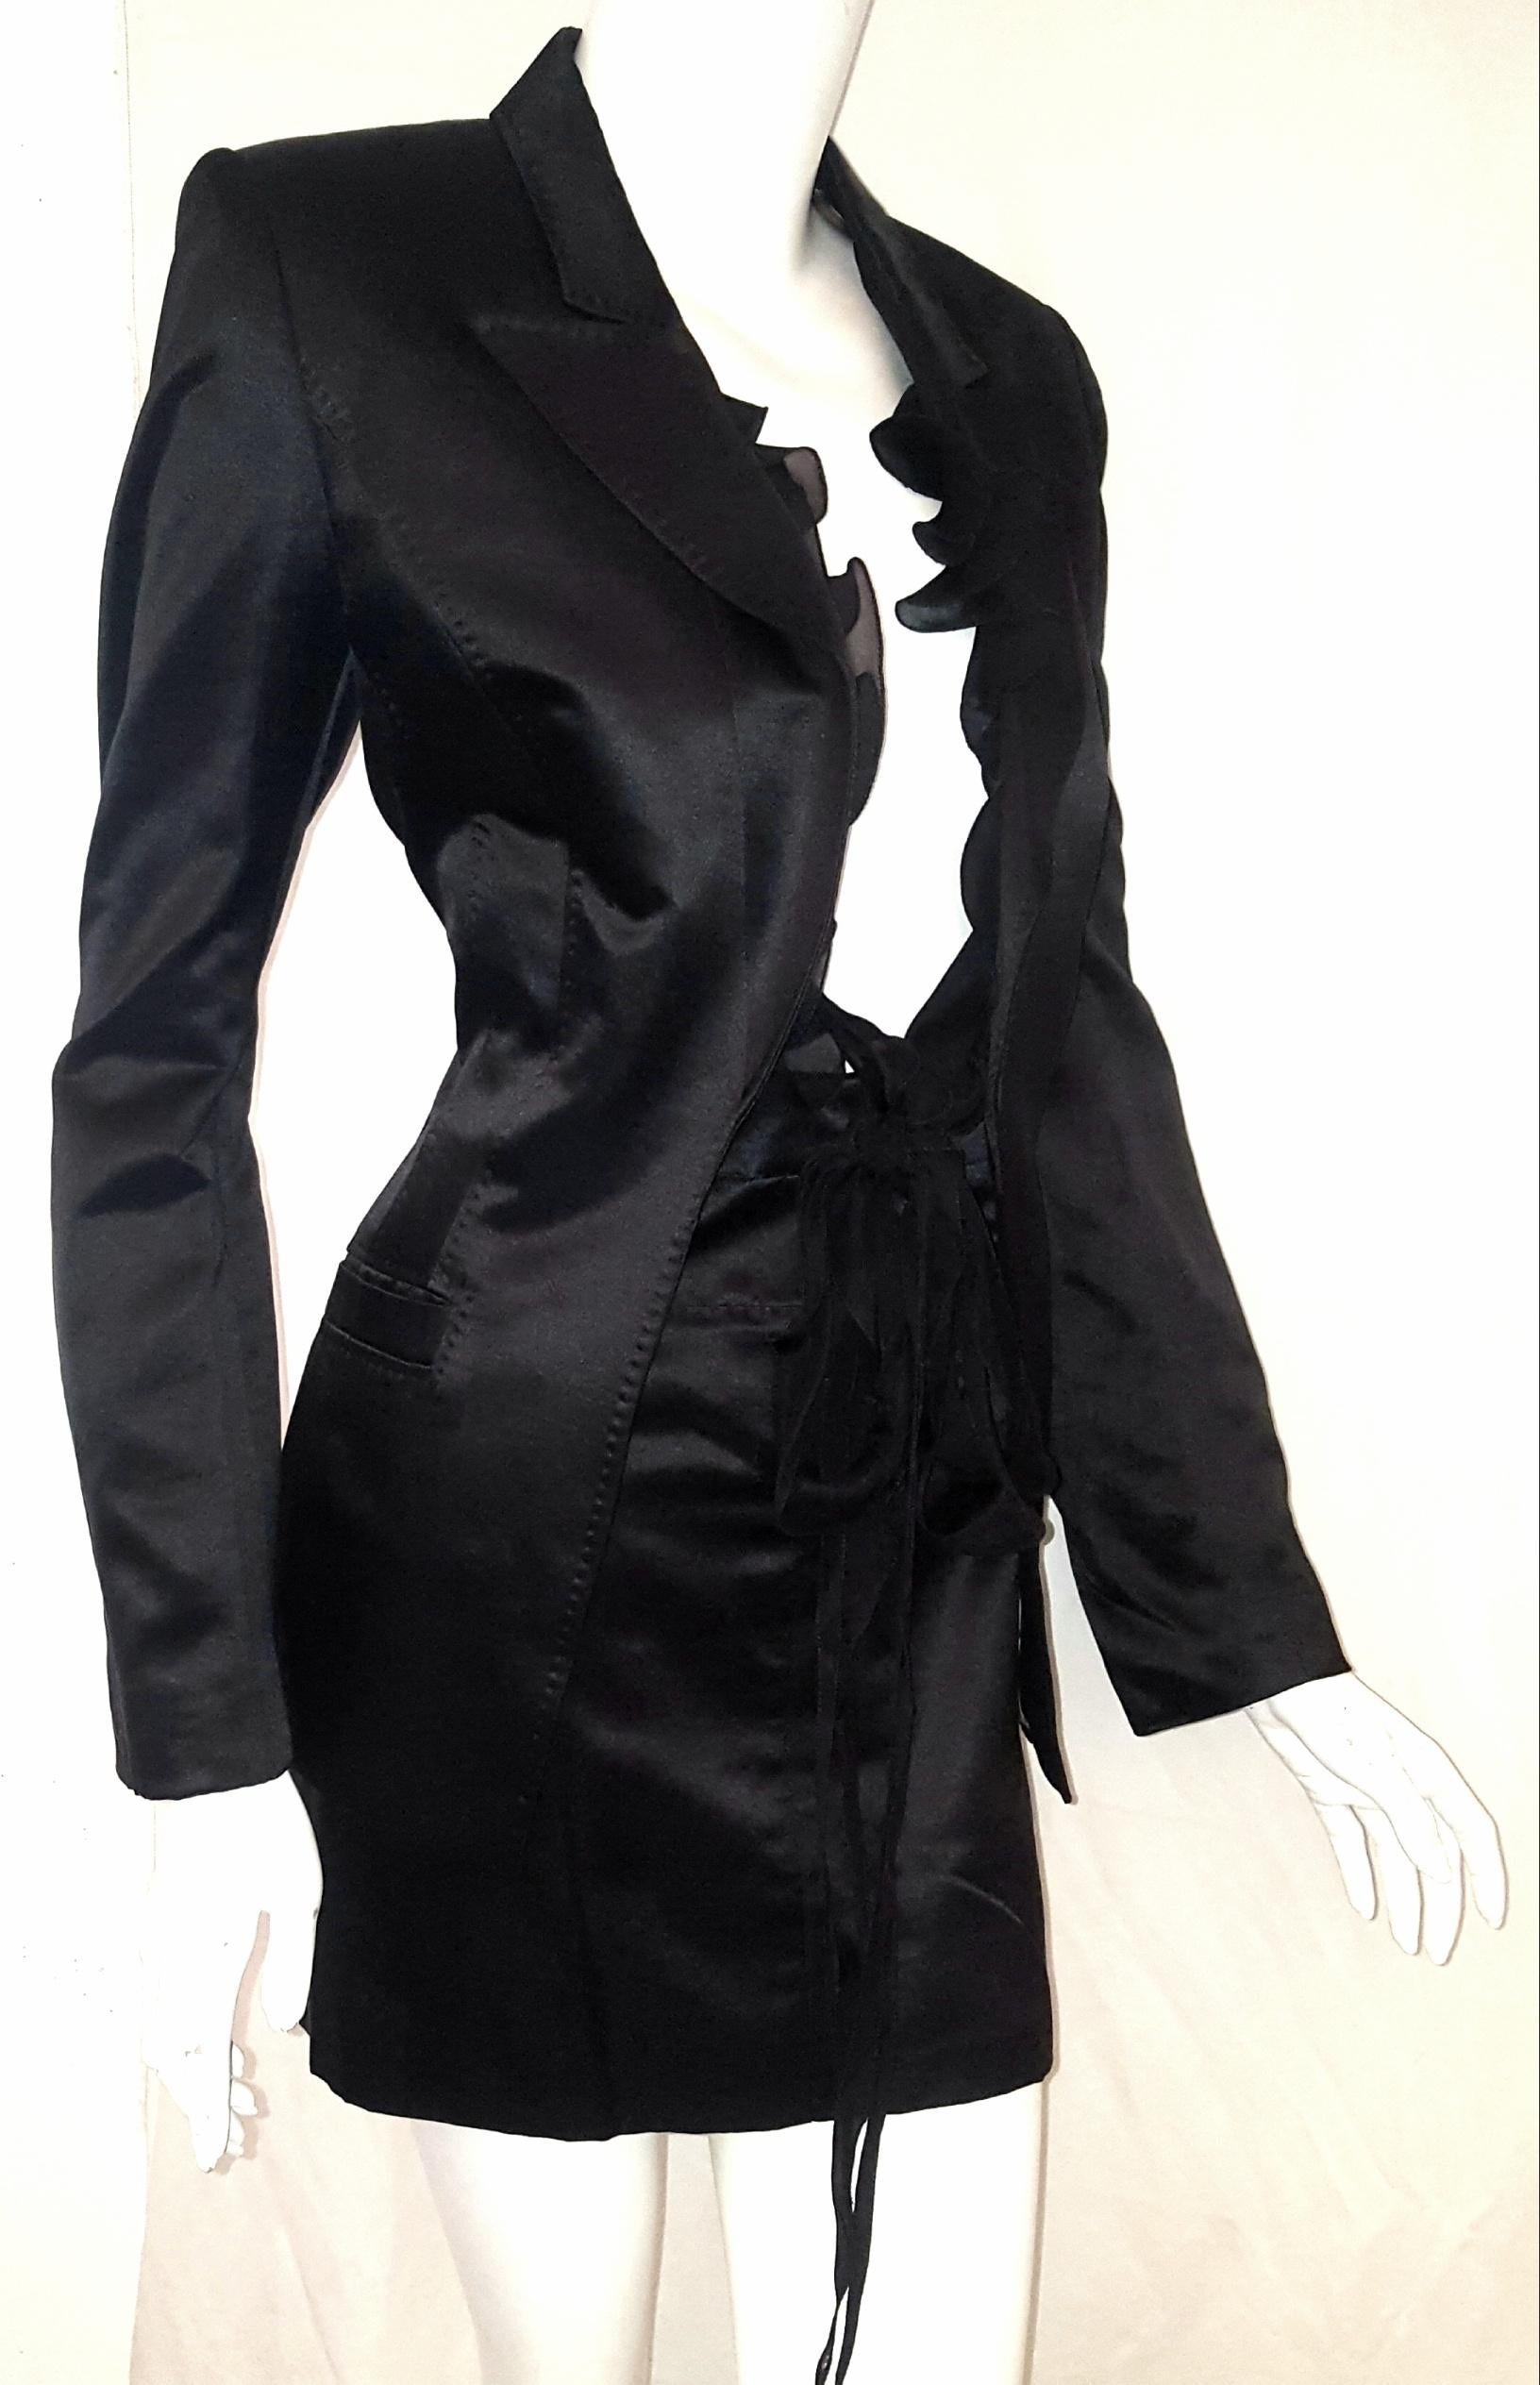 Roberto Cavalli black satin silk and cotton suit with silk ruffles that can be tied in a bow, for closure.  Features 5 concealed Roberto Cavalli buttons on each cuff.  Skirt has 2 hook and eye closures and one zipper at front.  Both pieces are lined